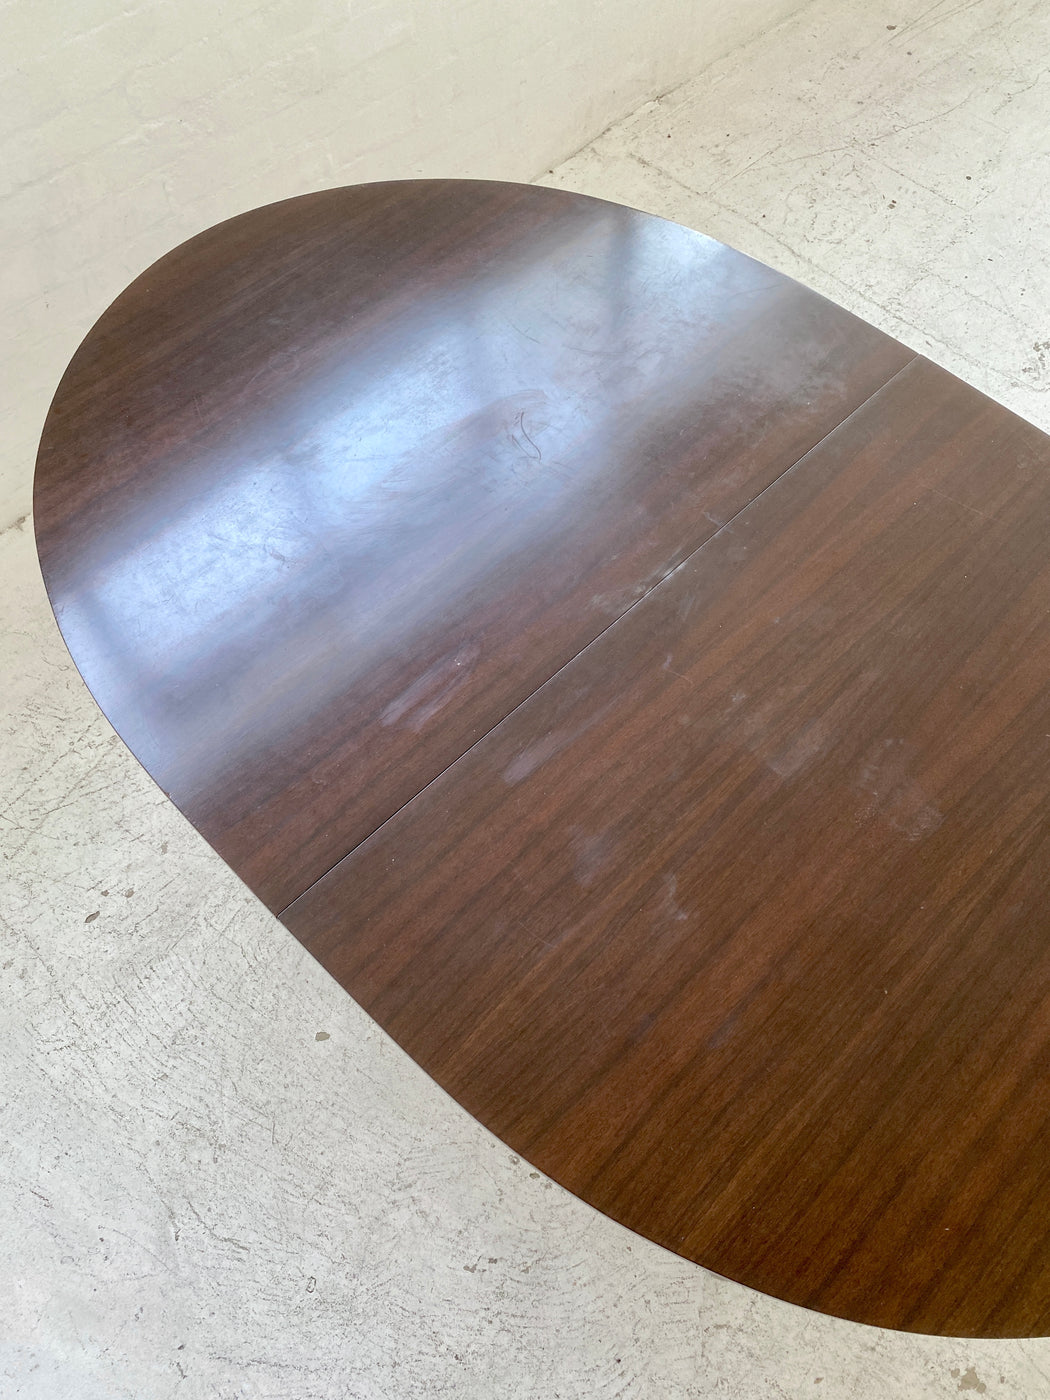 Vintage Extension Dining Table